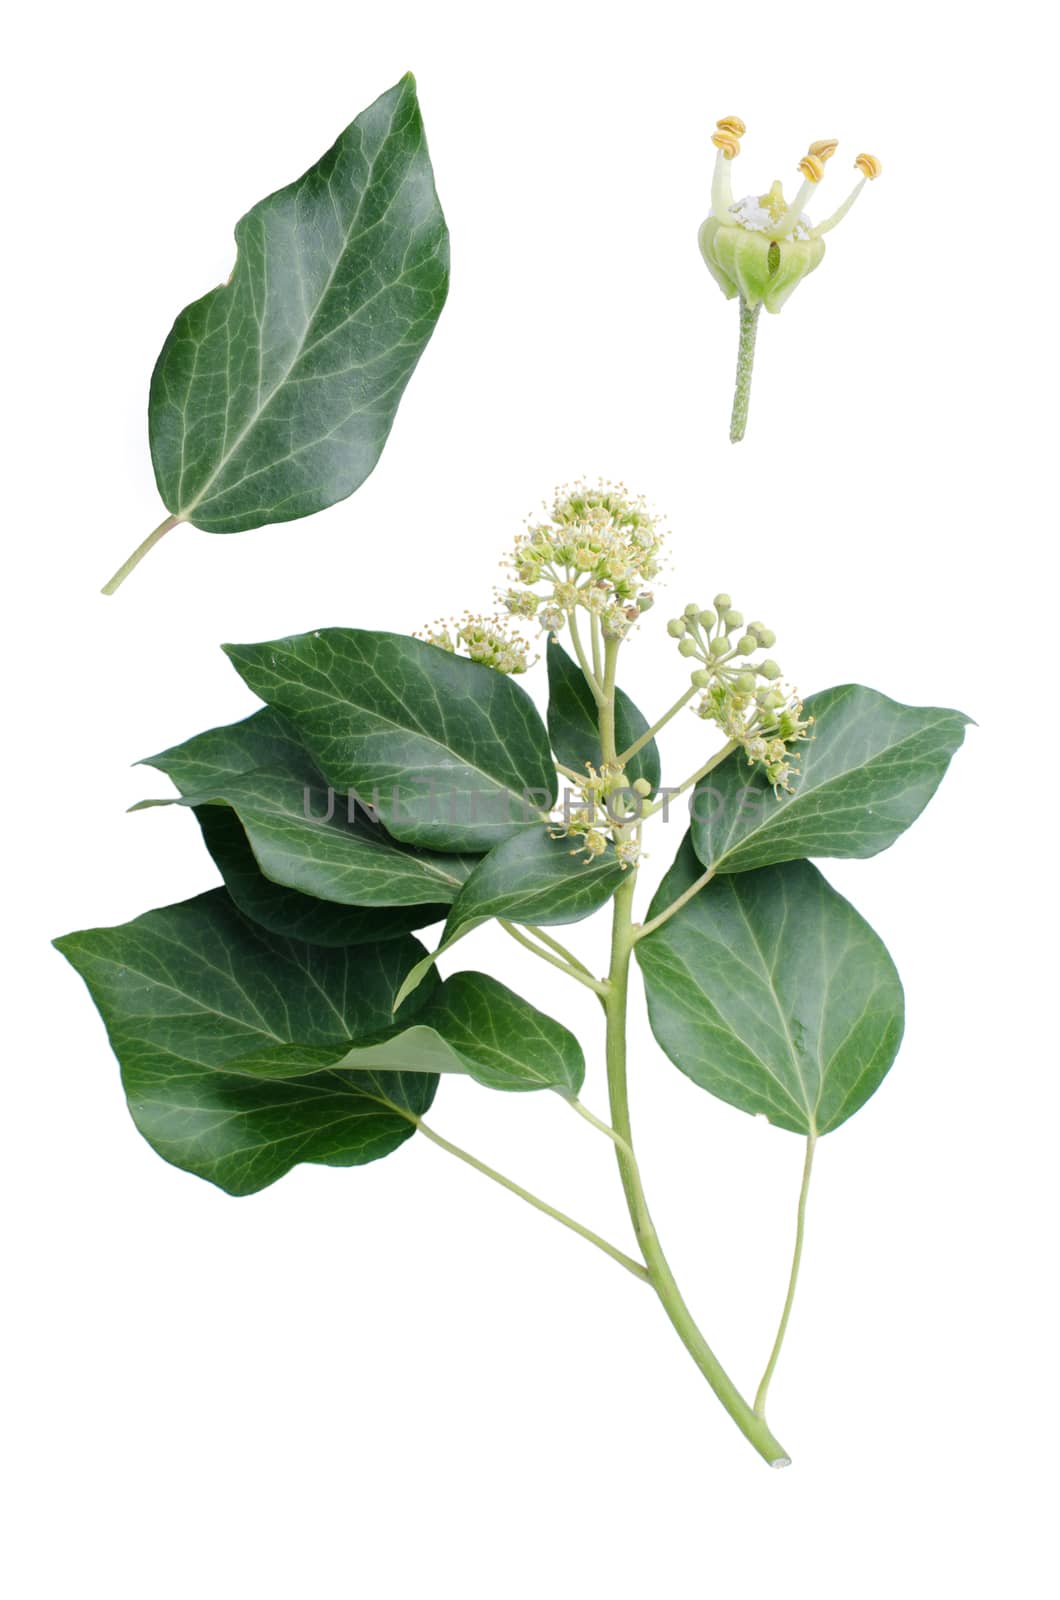 Hedera branch with leaf and bloom detail beside isolated on white background.